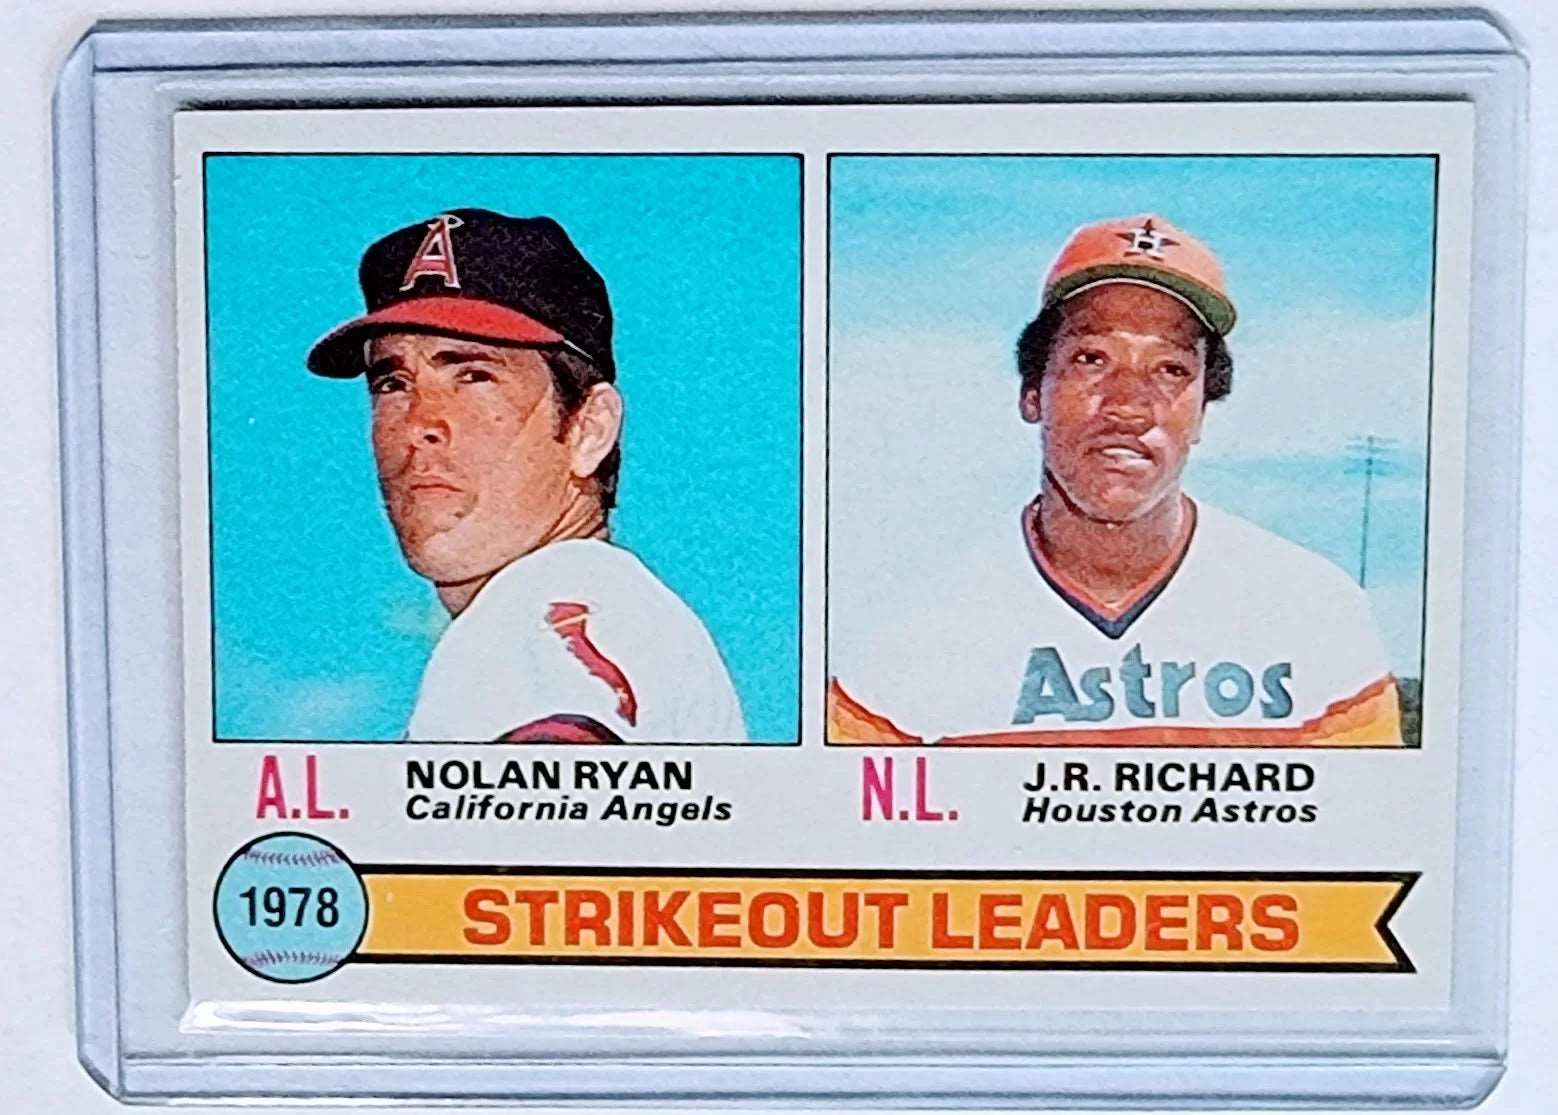 1979 Topps Strikeout Leaders Card with J.R. Richard! Relive Nolan Ryan